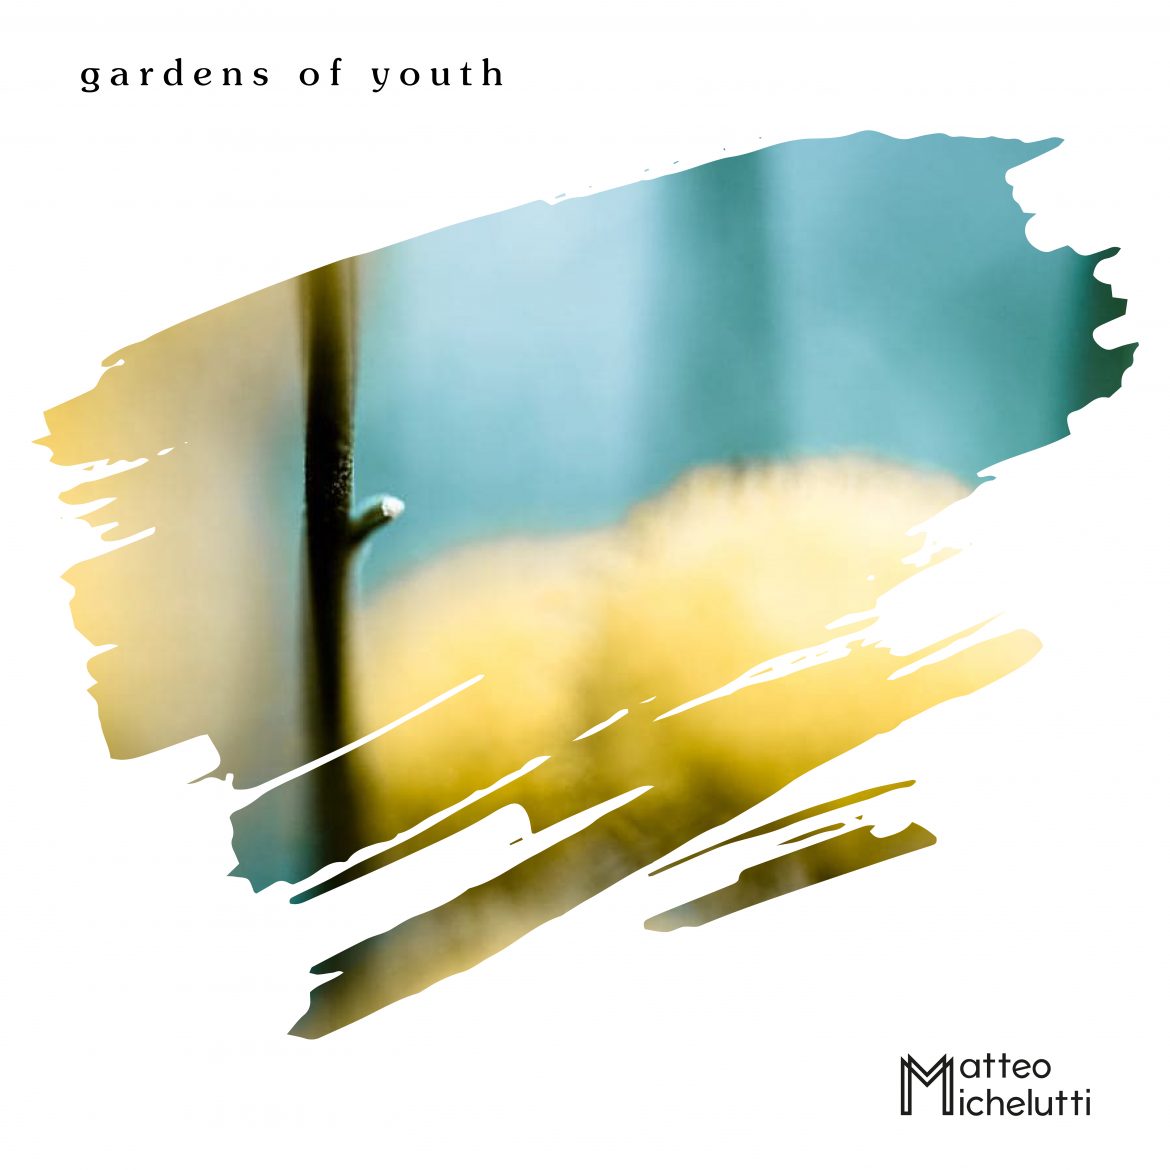 Matteo Michelutti’s work has been featured in some short animated films as he releases new single ‘Gardens of Youth’